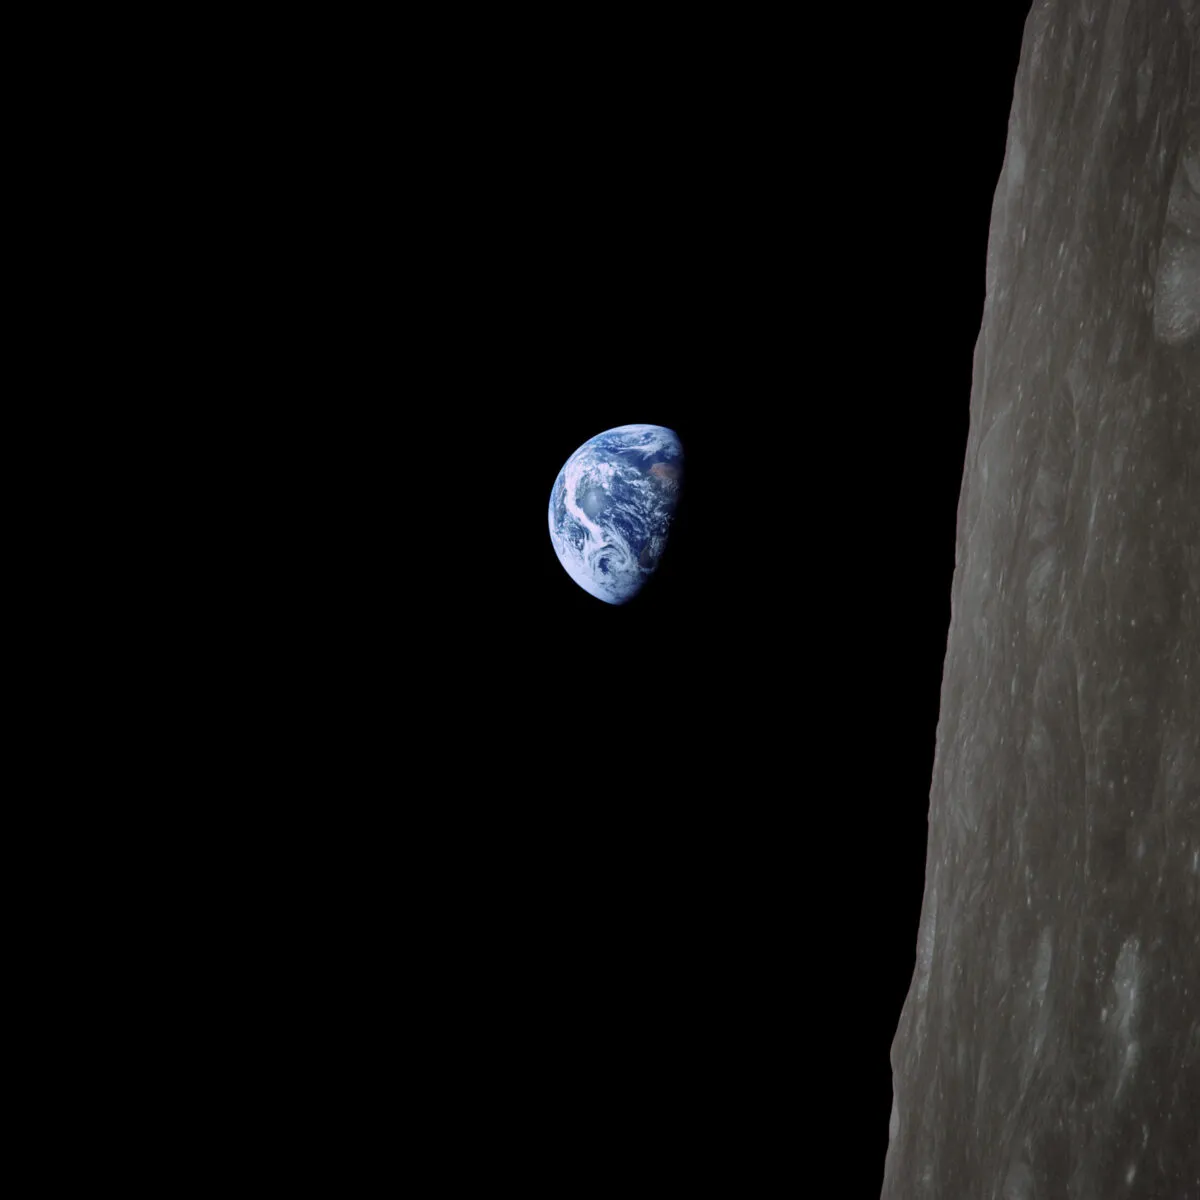 Bill Anders' famous colour earthrise shot, captured during Apollo 8, 24 December 1968. Credit: NASA / restored by Toby Ord